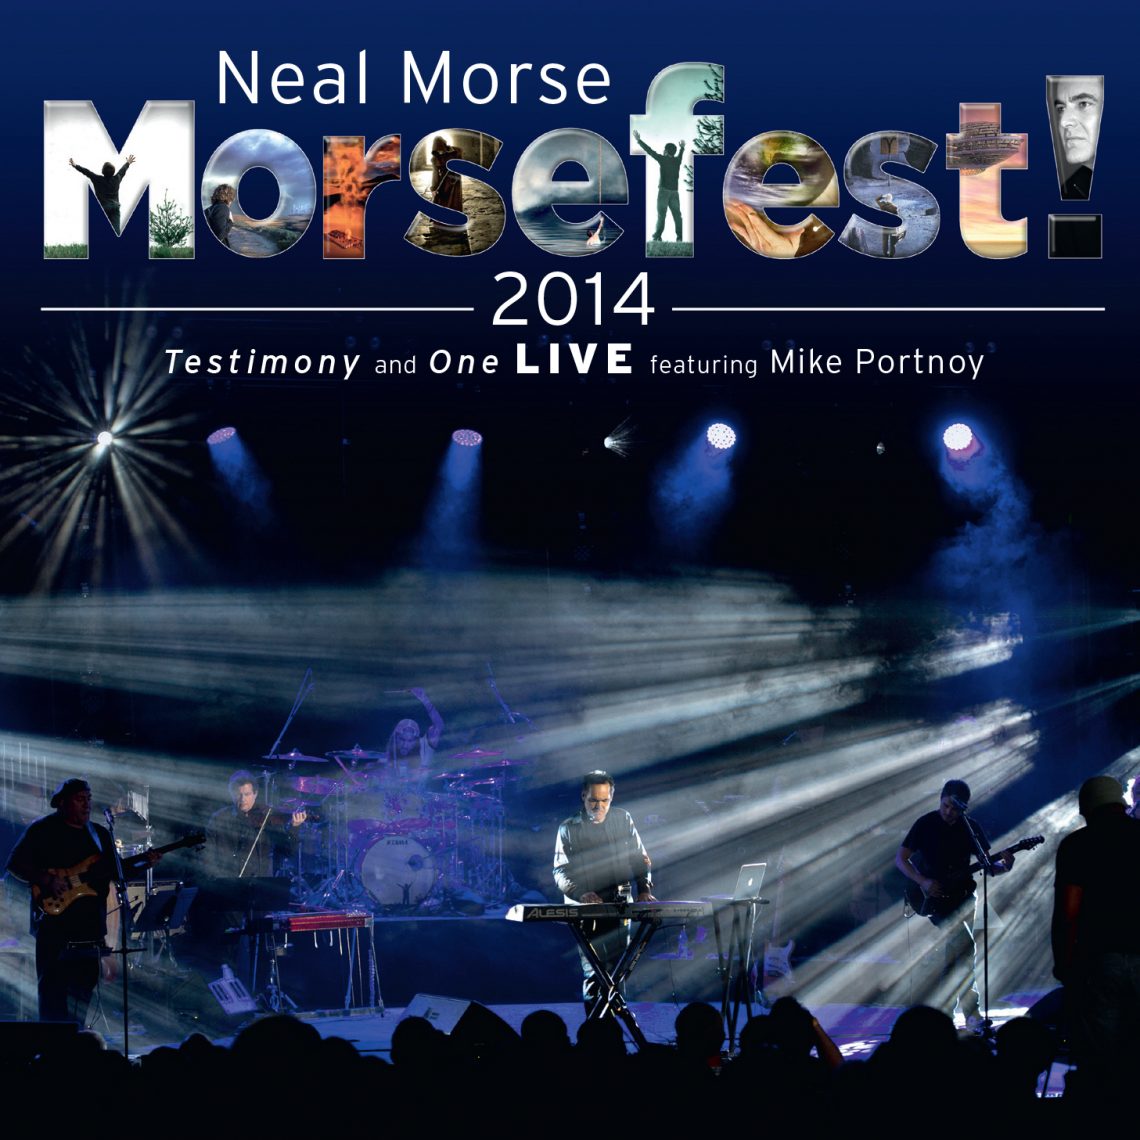 Neal Morse to release new live album – Morsefest 2014, Testimony And One Live